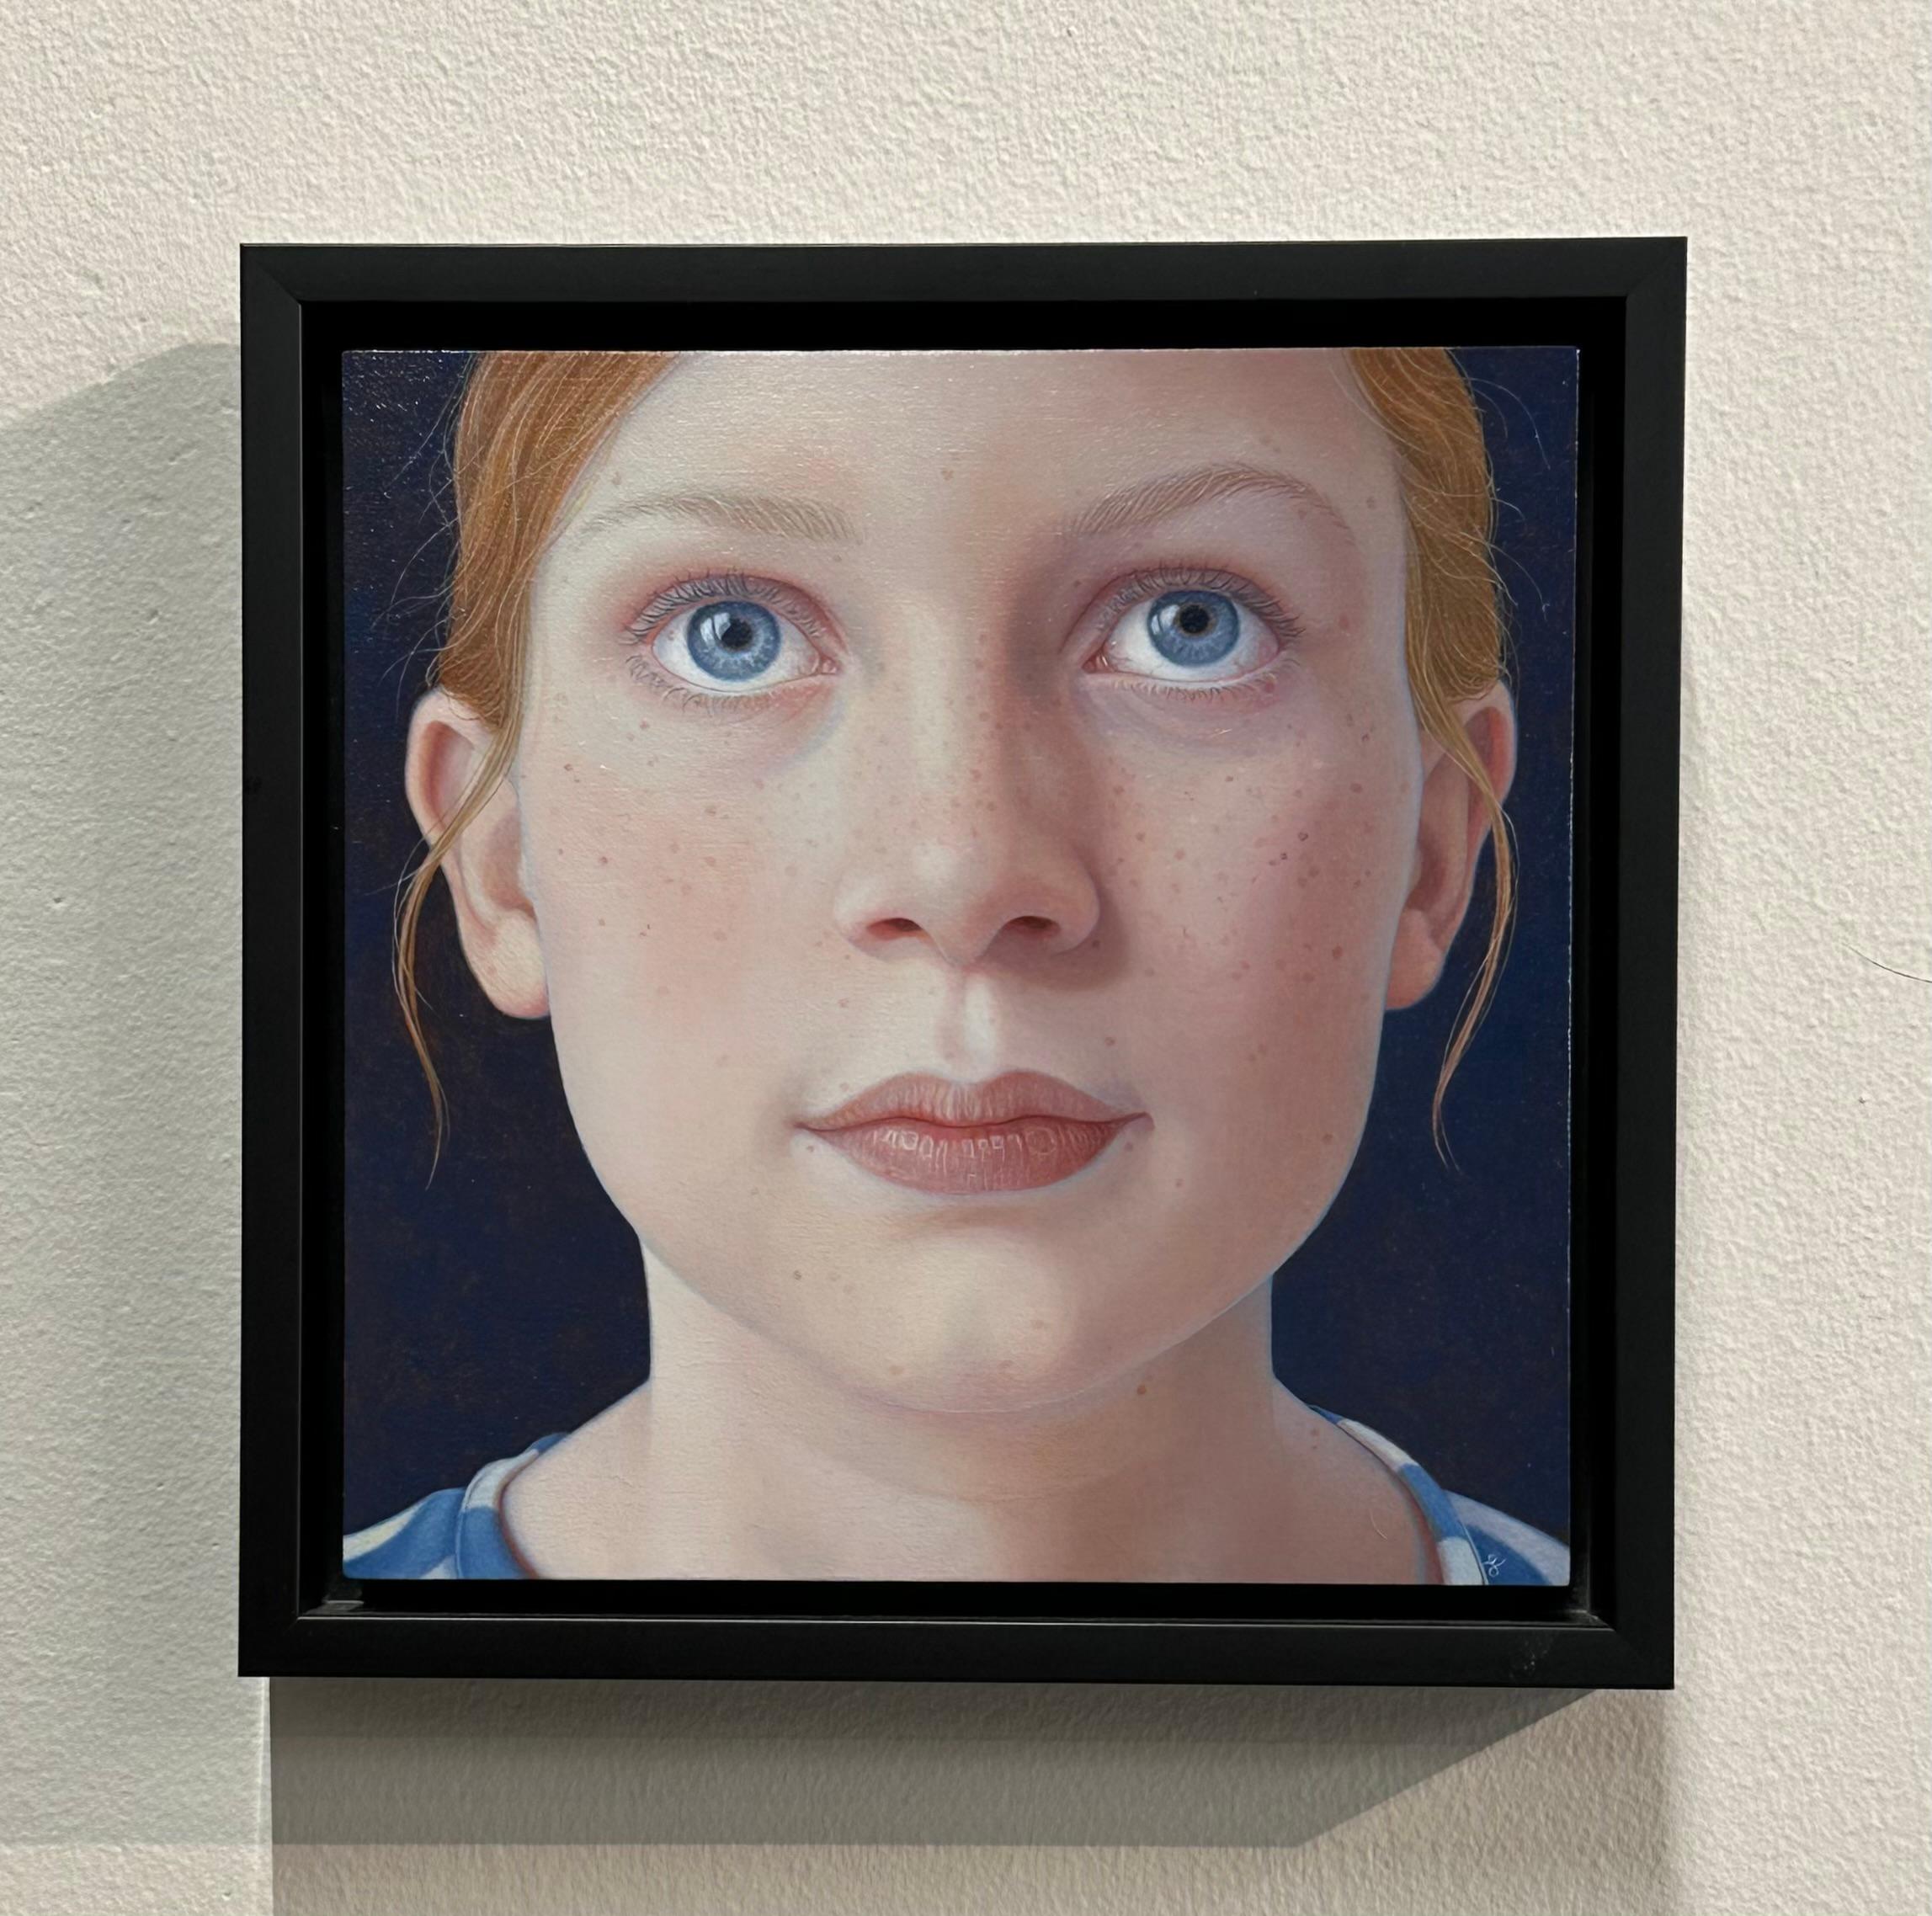 Imke- 21st Century Contemporary Portrait of a young Ginger Girl  - Gray Figurative Painting by Jantina Peperkamp